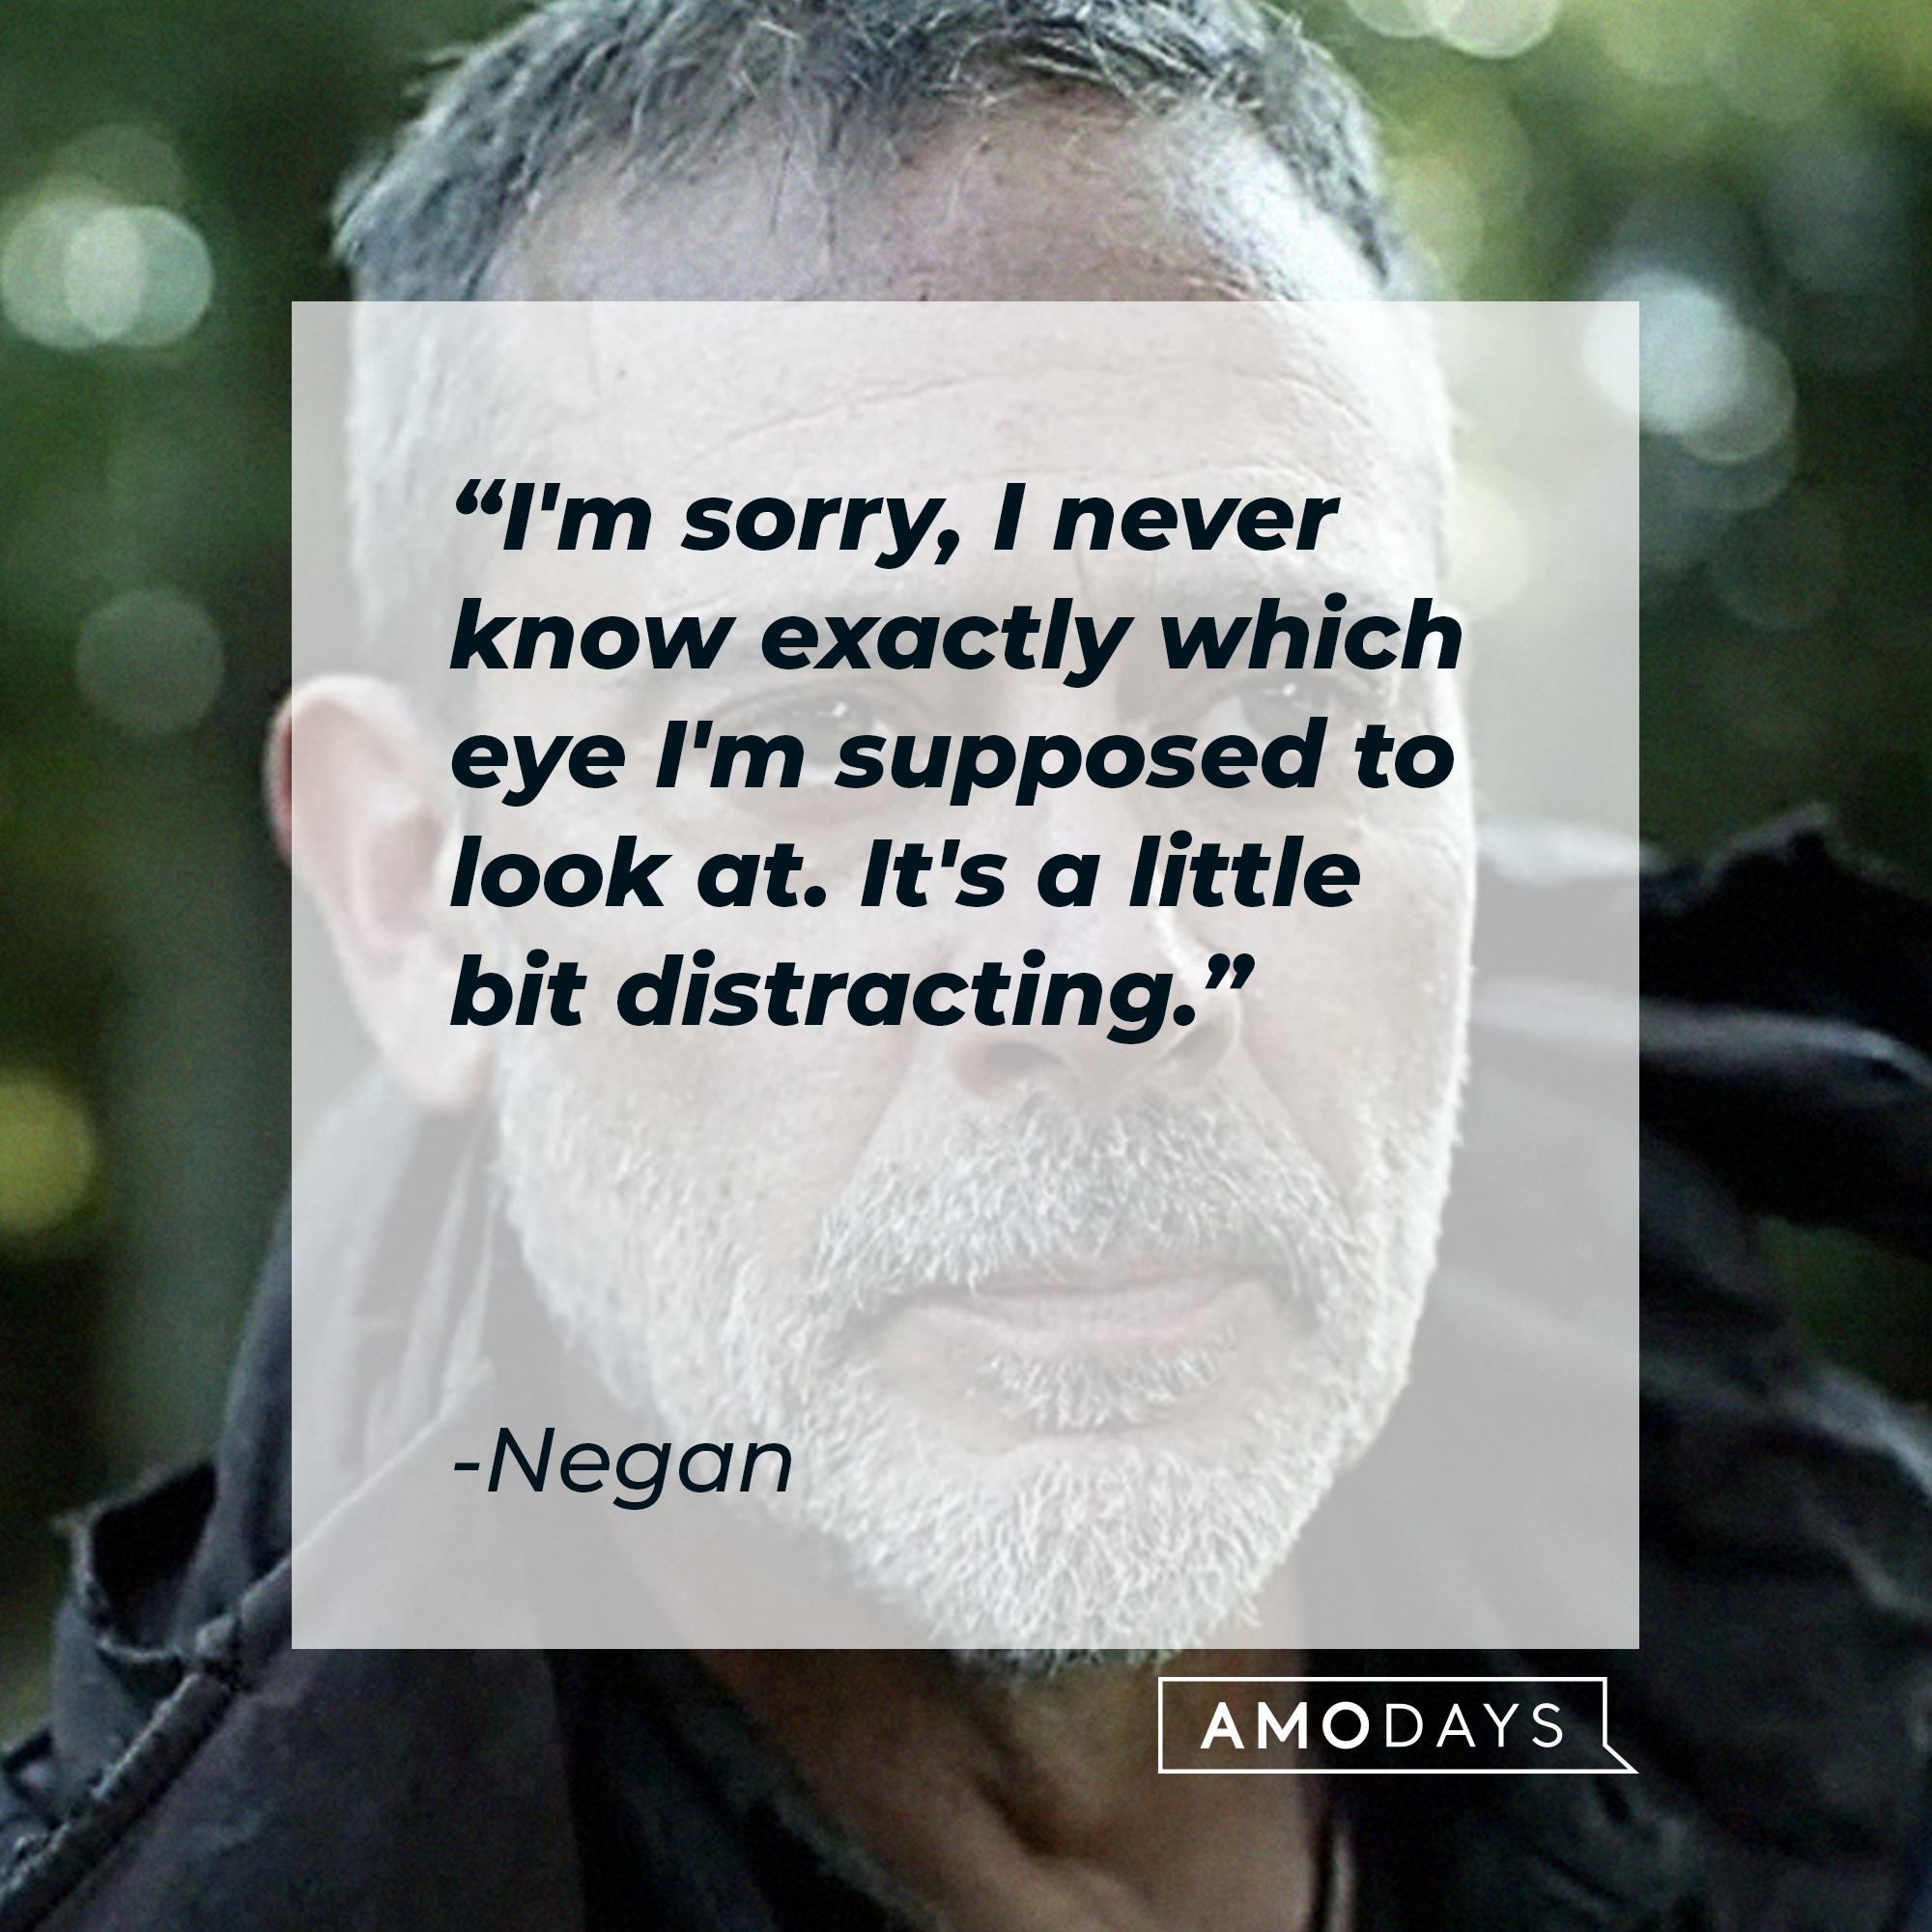 Negan's quote: "I'm sorry, I never know exactly which eye I'm supposed to look at. It's a little bit distracting." | Source: Facebook/TheWalkingDeadAMC